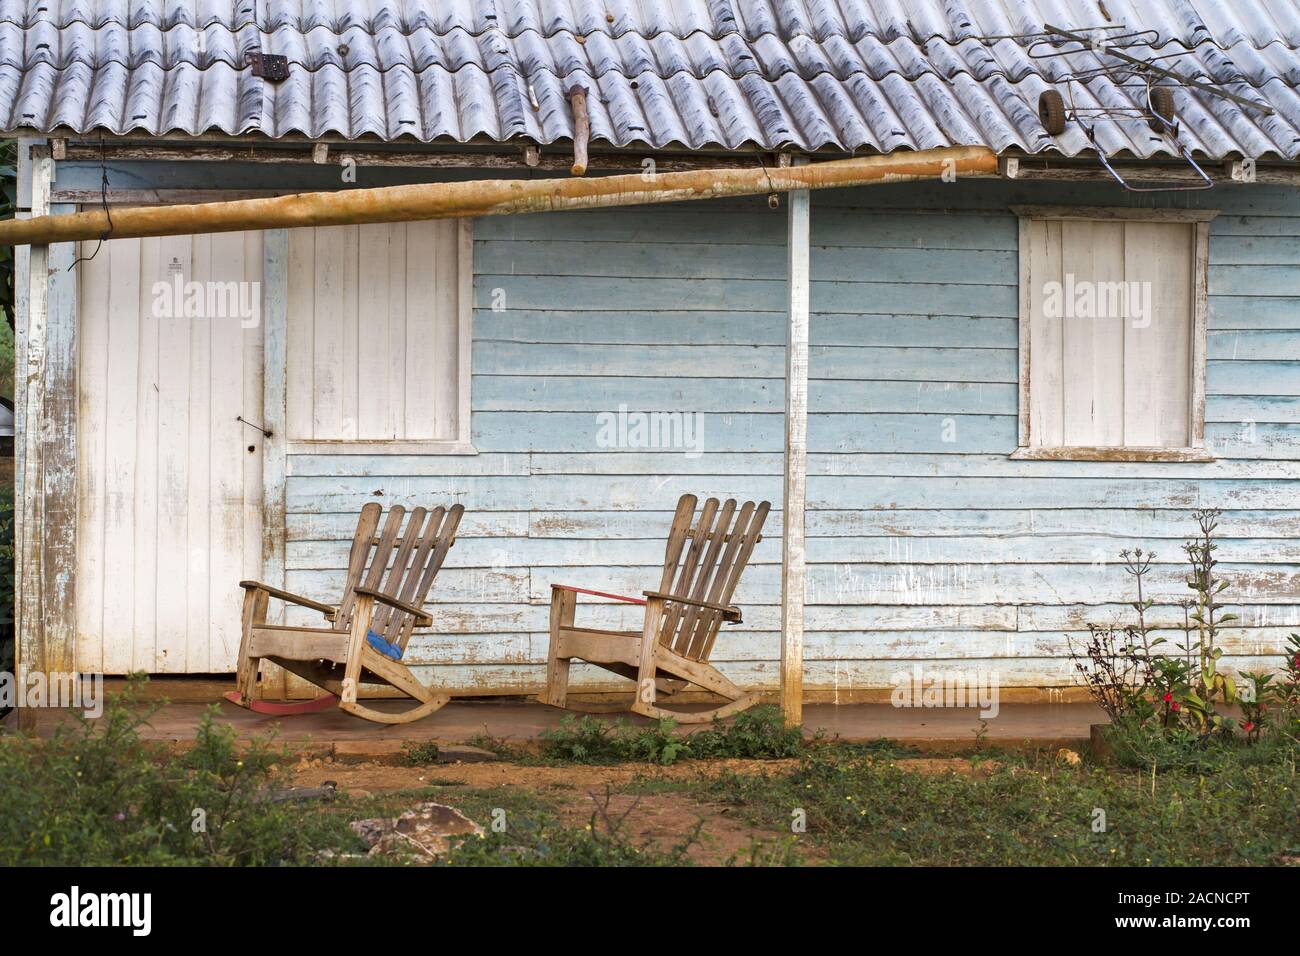 Cuban house with rocking chairs Stock Photo